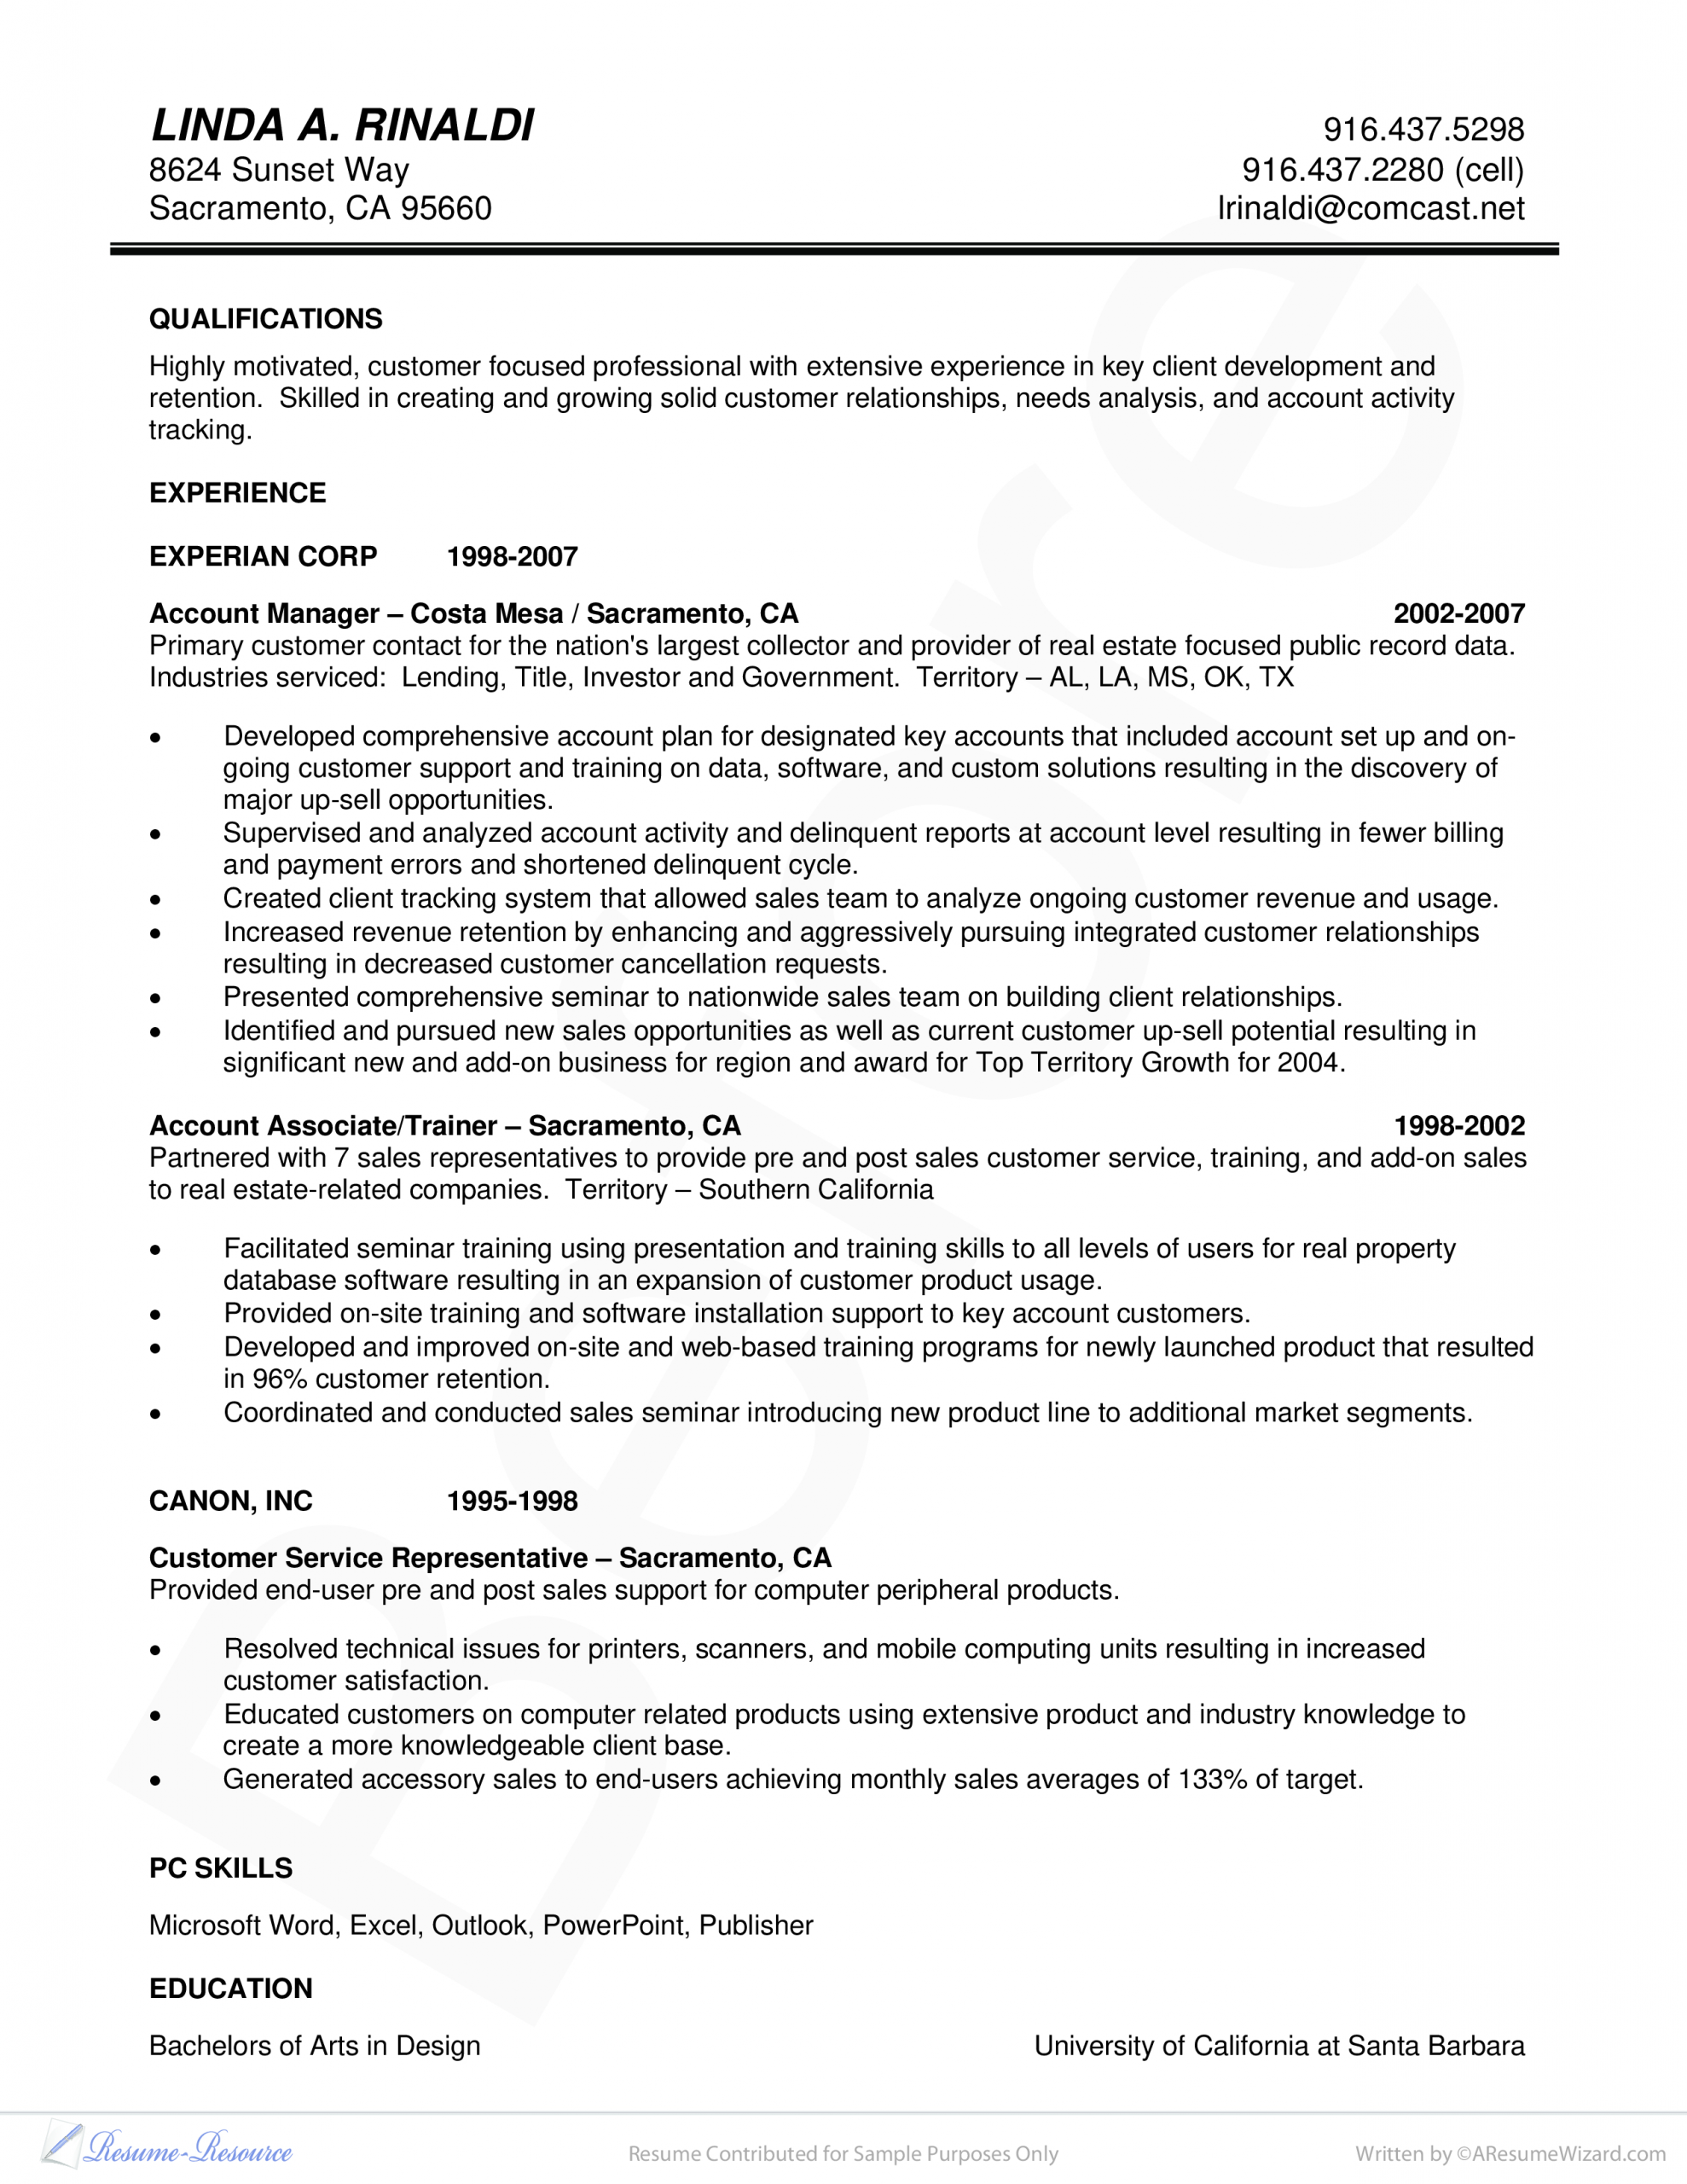 Accounting Manager Curriculum Vitae Templates At pertaining to proportions 2550 X 3300